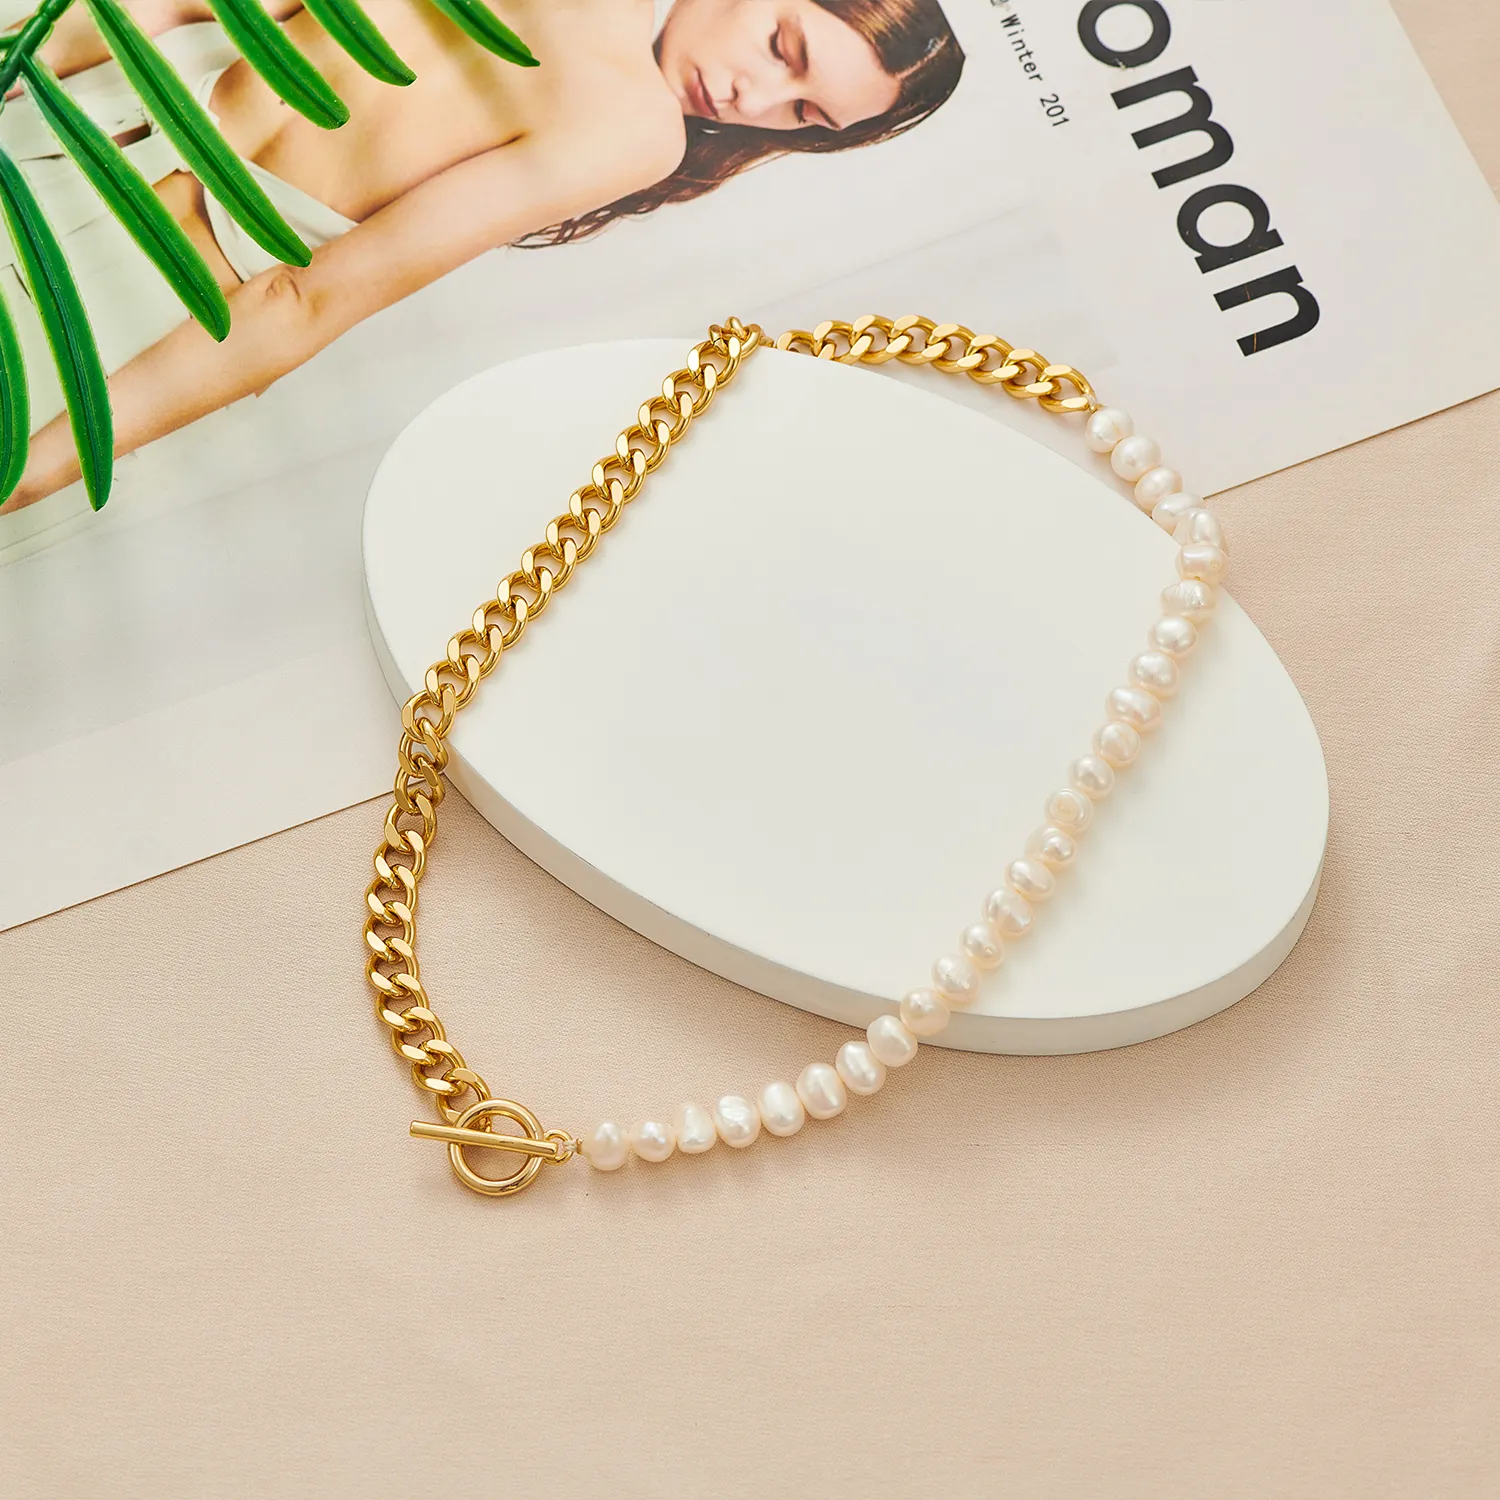 Pearl and Cuban Chain Splicing Chain dress White Elegant Women Gold Plated 9.25 Silver Women's Party Necklaces 1pcs/opp Bag N/A